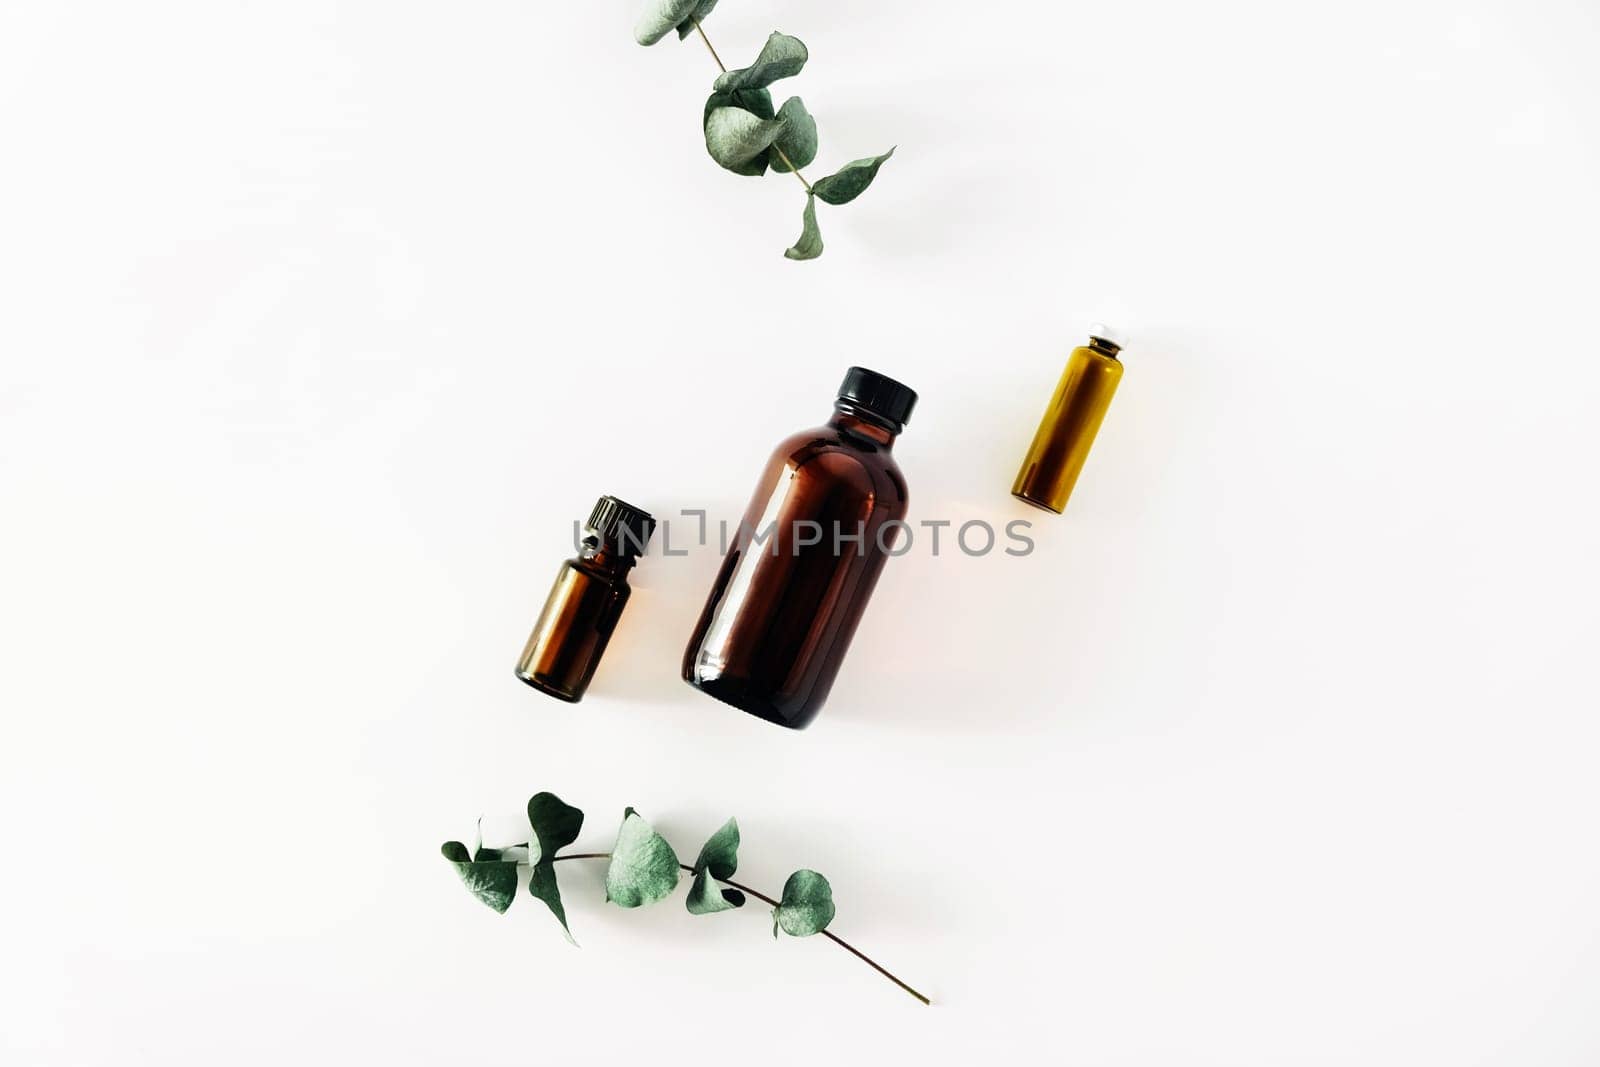 Two bottles of fragrant cosmetic or essential oil on a white background surrounded by sprigs of eucalyptus. Stay home and be mentally healthy.